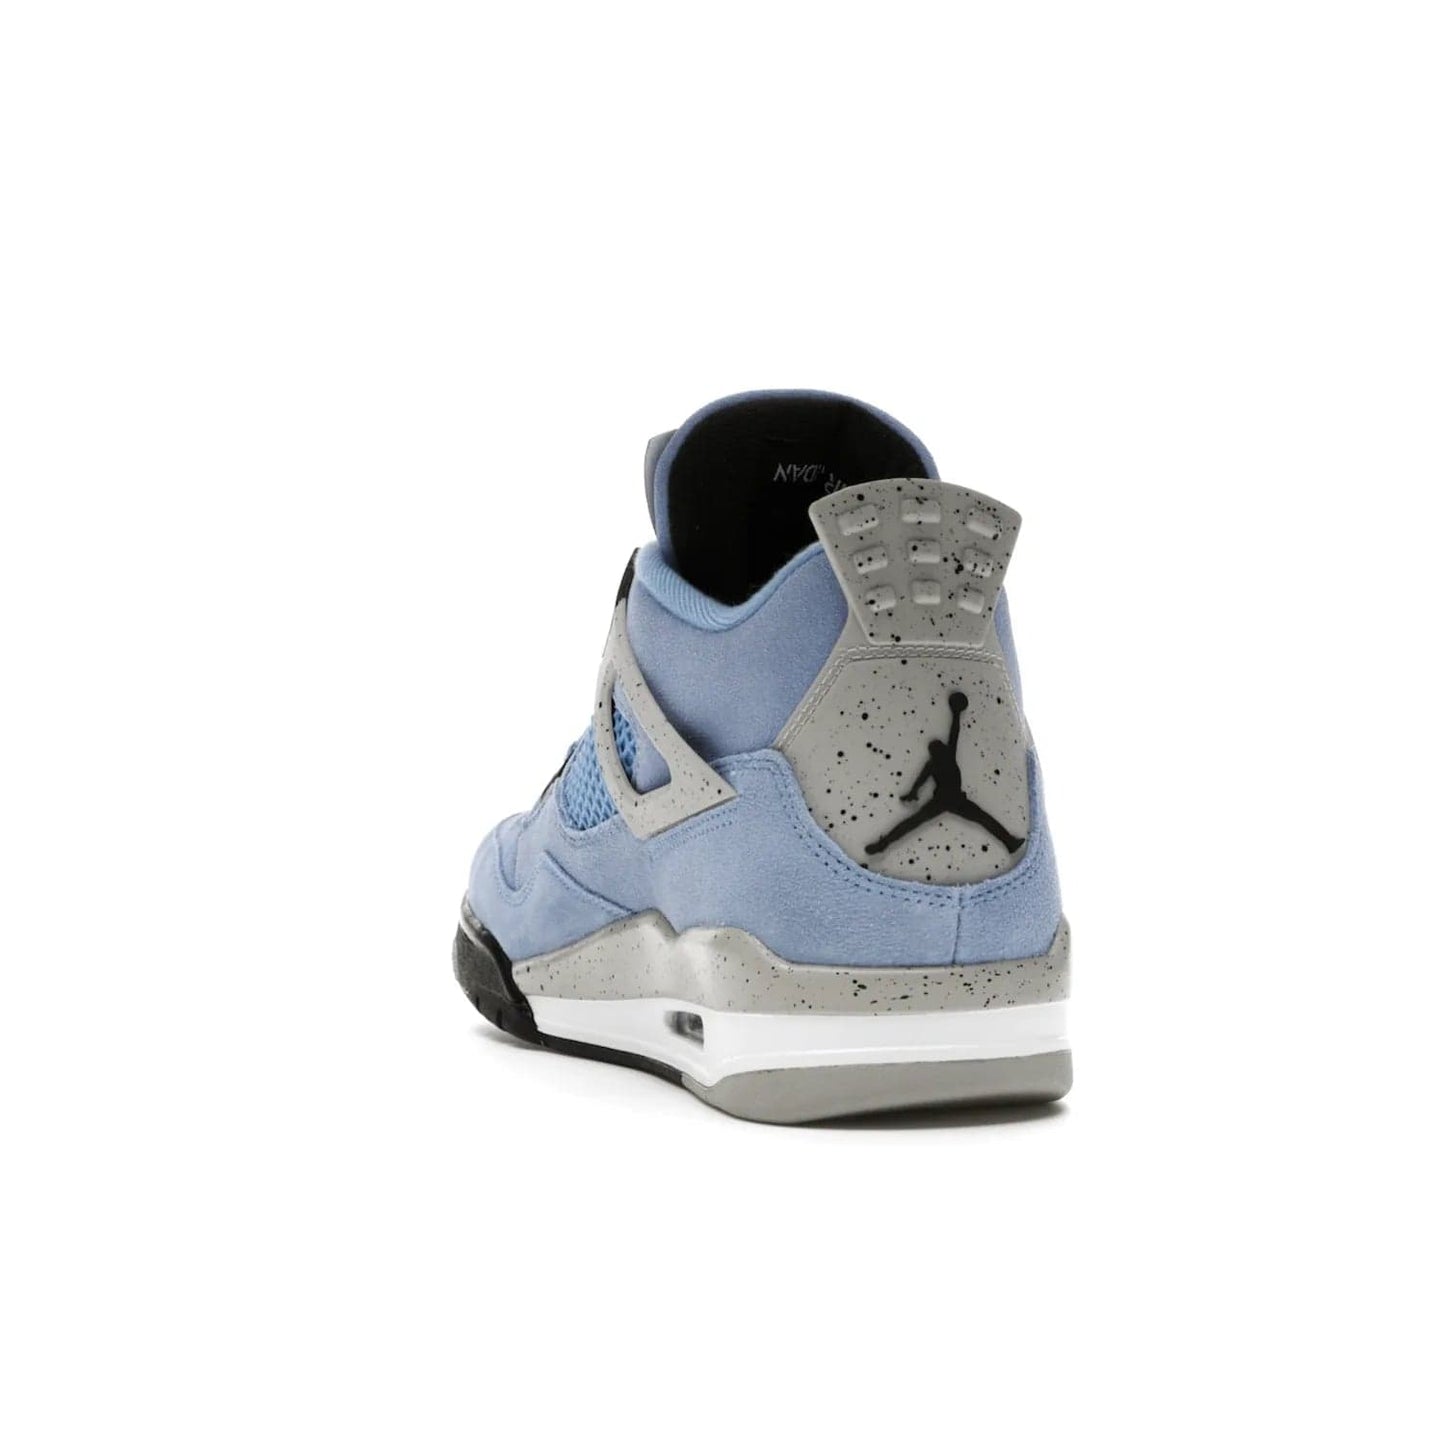 Jordan 4 Retro University Blue - Image 26 - Only at www.BallersClubKickz.com - The Air Jordan 4 University Blue honors MJ's alma mater. Rich University Blue suede, panels of netting, and Cement Grey speckled eyelets give this design an edgy look. Features a black, white and Tech Grey sole with a clear Air unit and two woven labels on the tongue. Jumpman logo & Team Jordan jock tag included. Released April 2021.